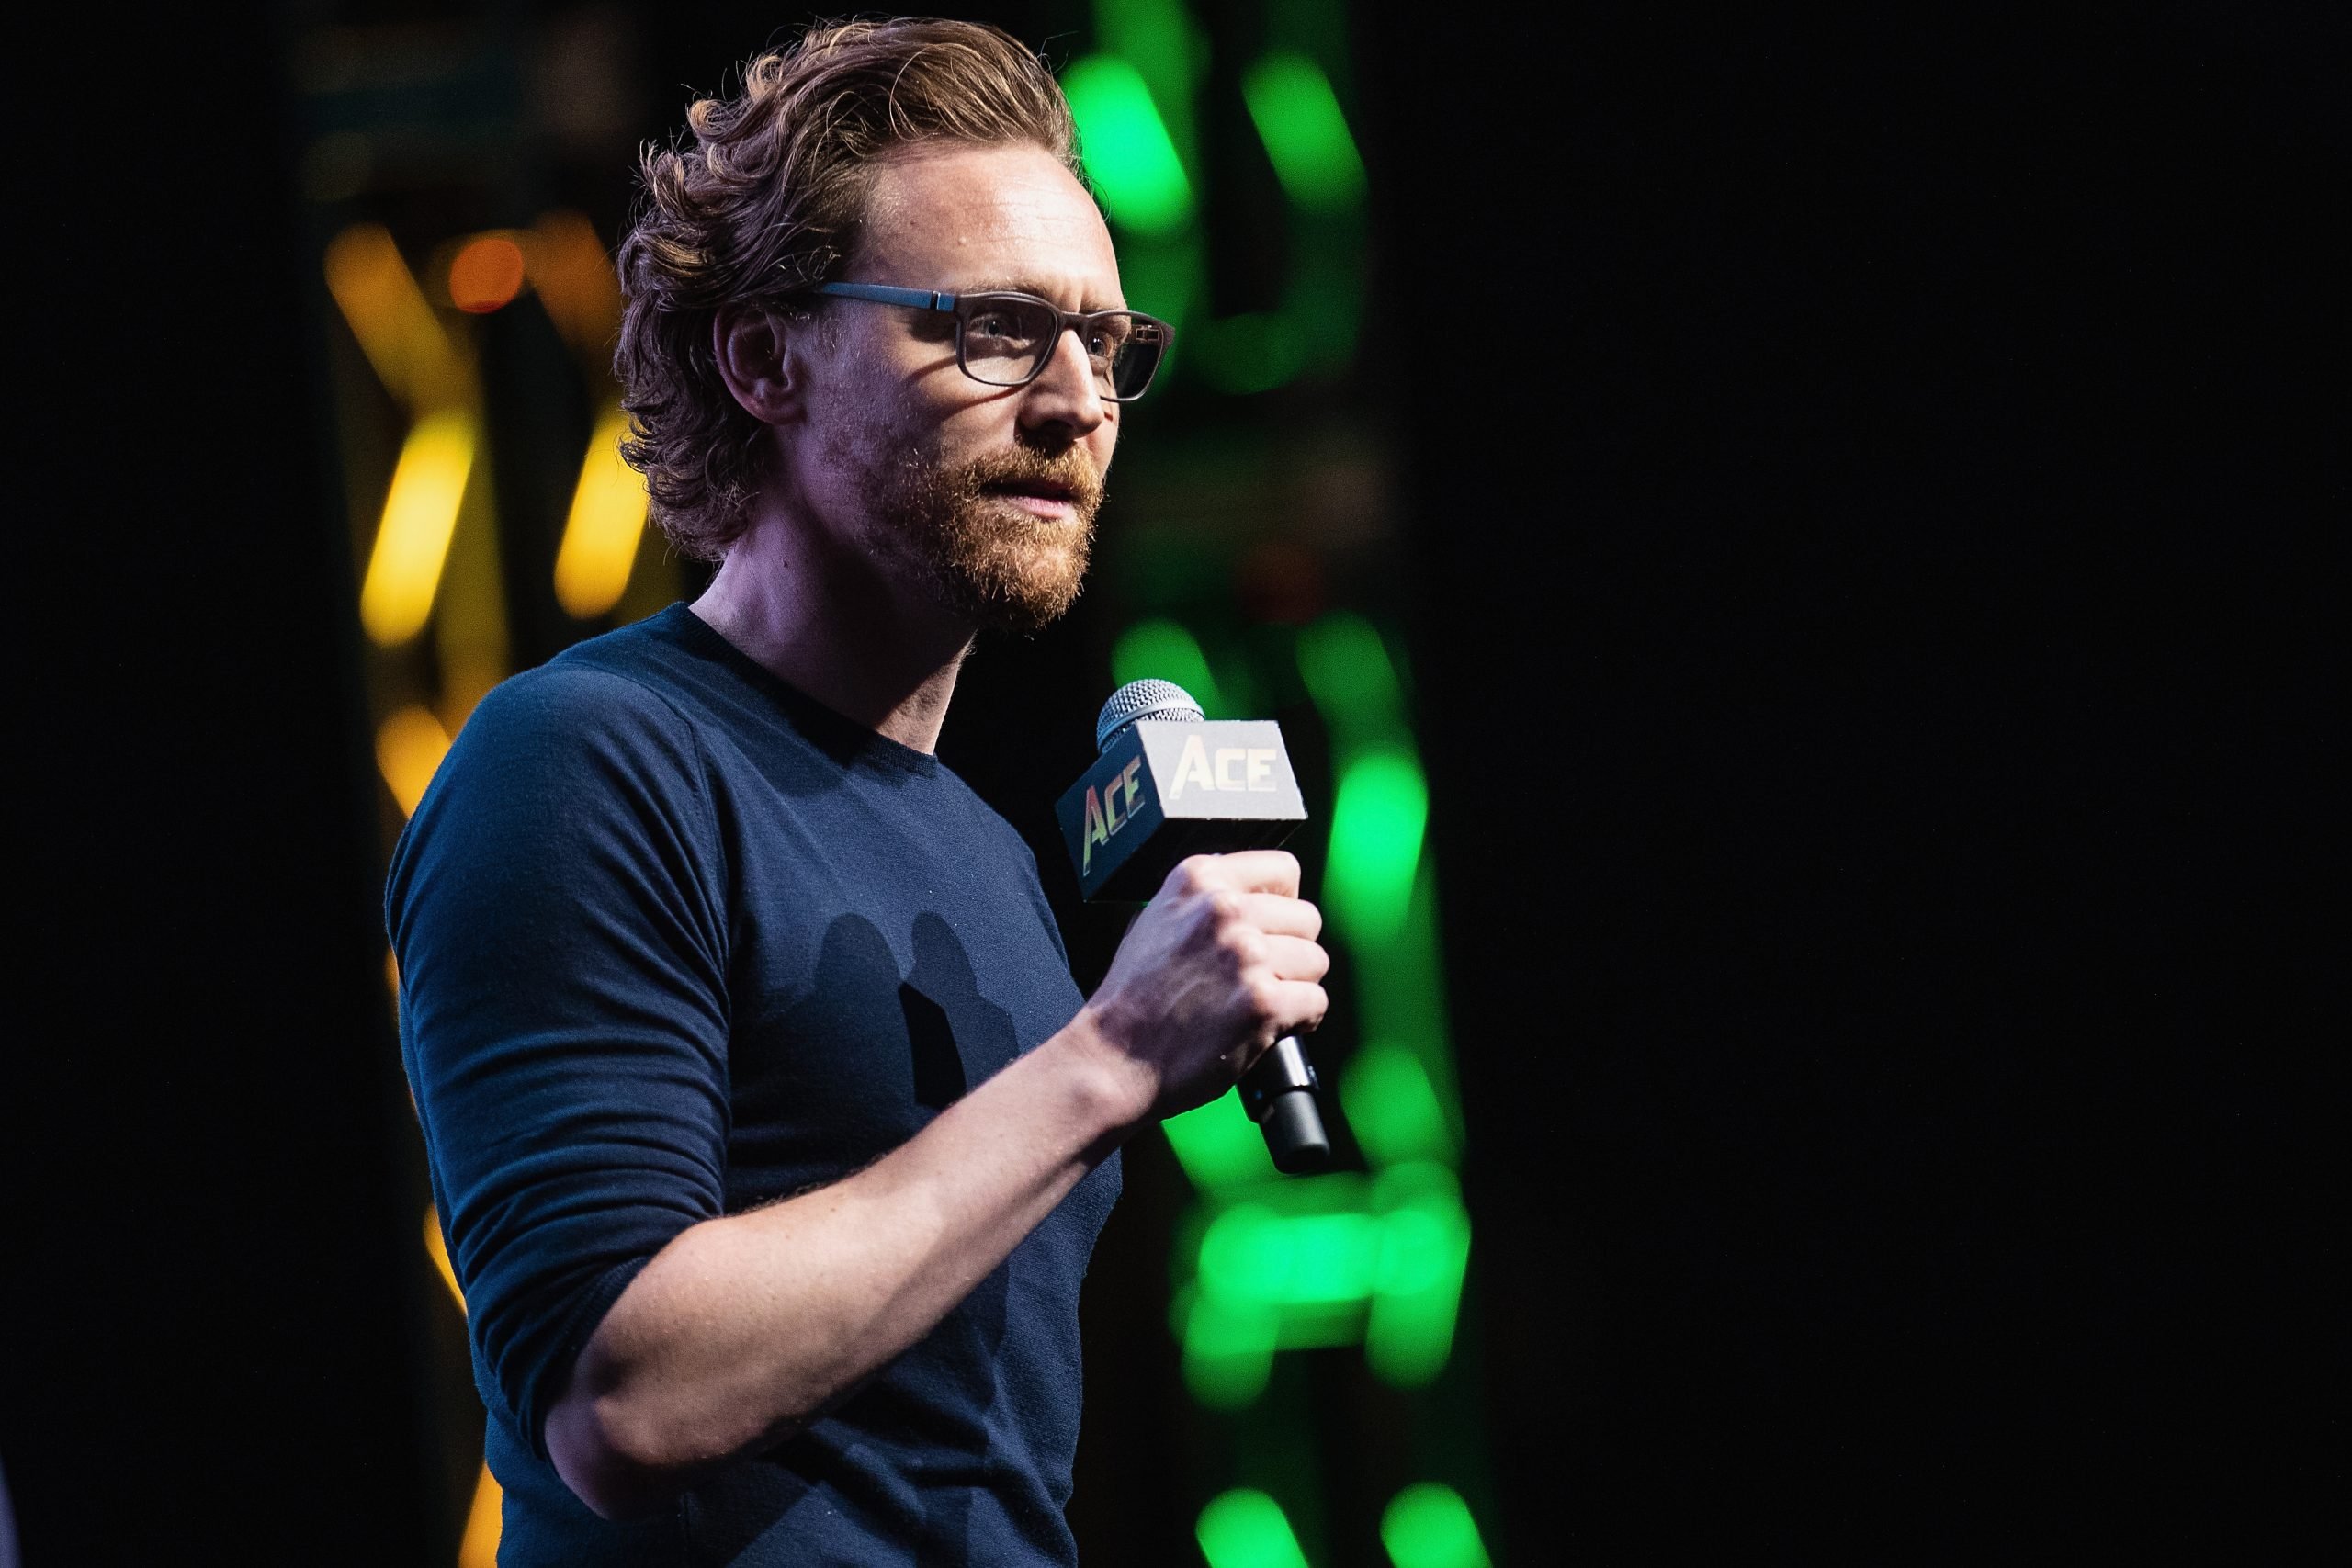 Tom Hiddleston speaks on stage about life as Loki in the Marvel Universe